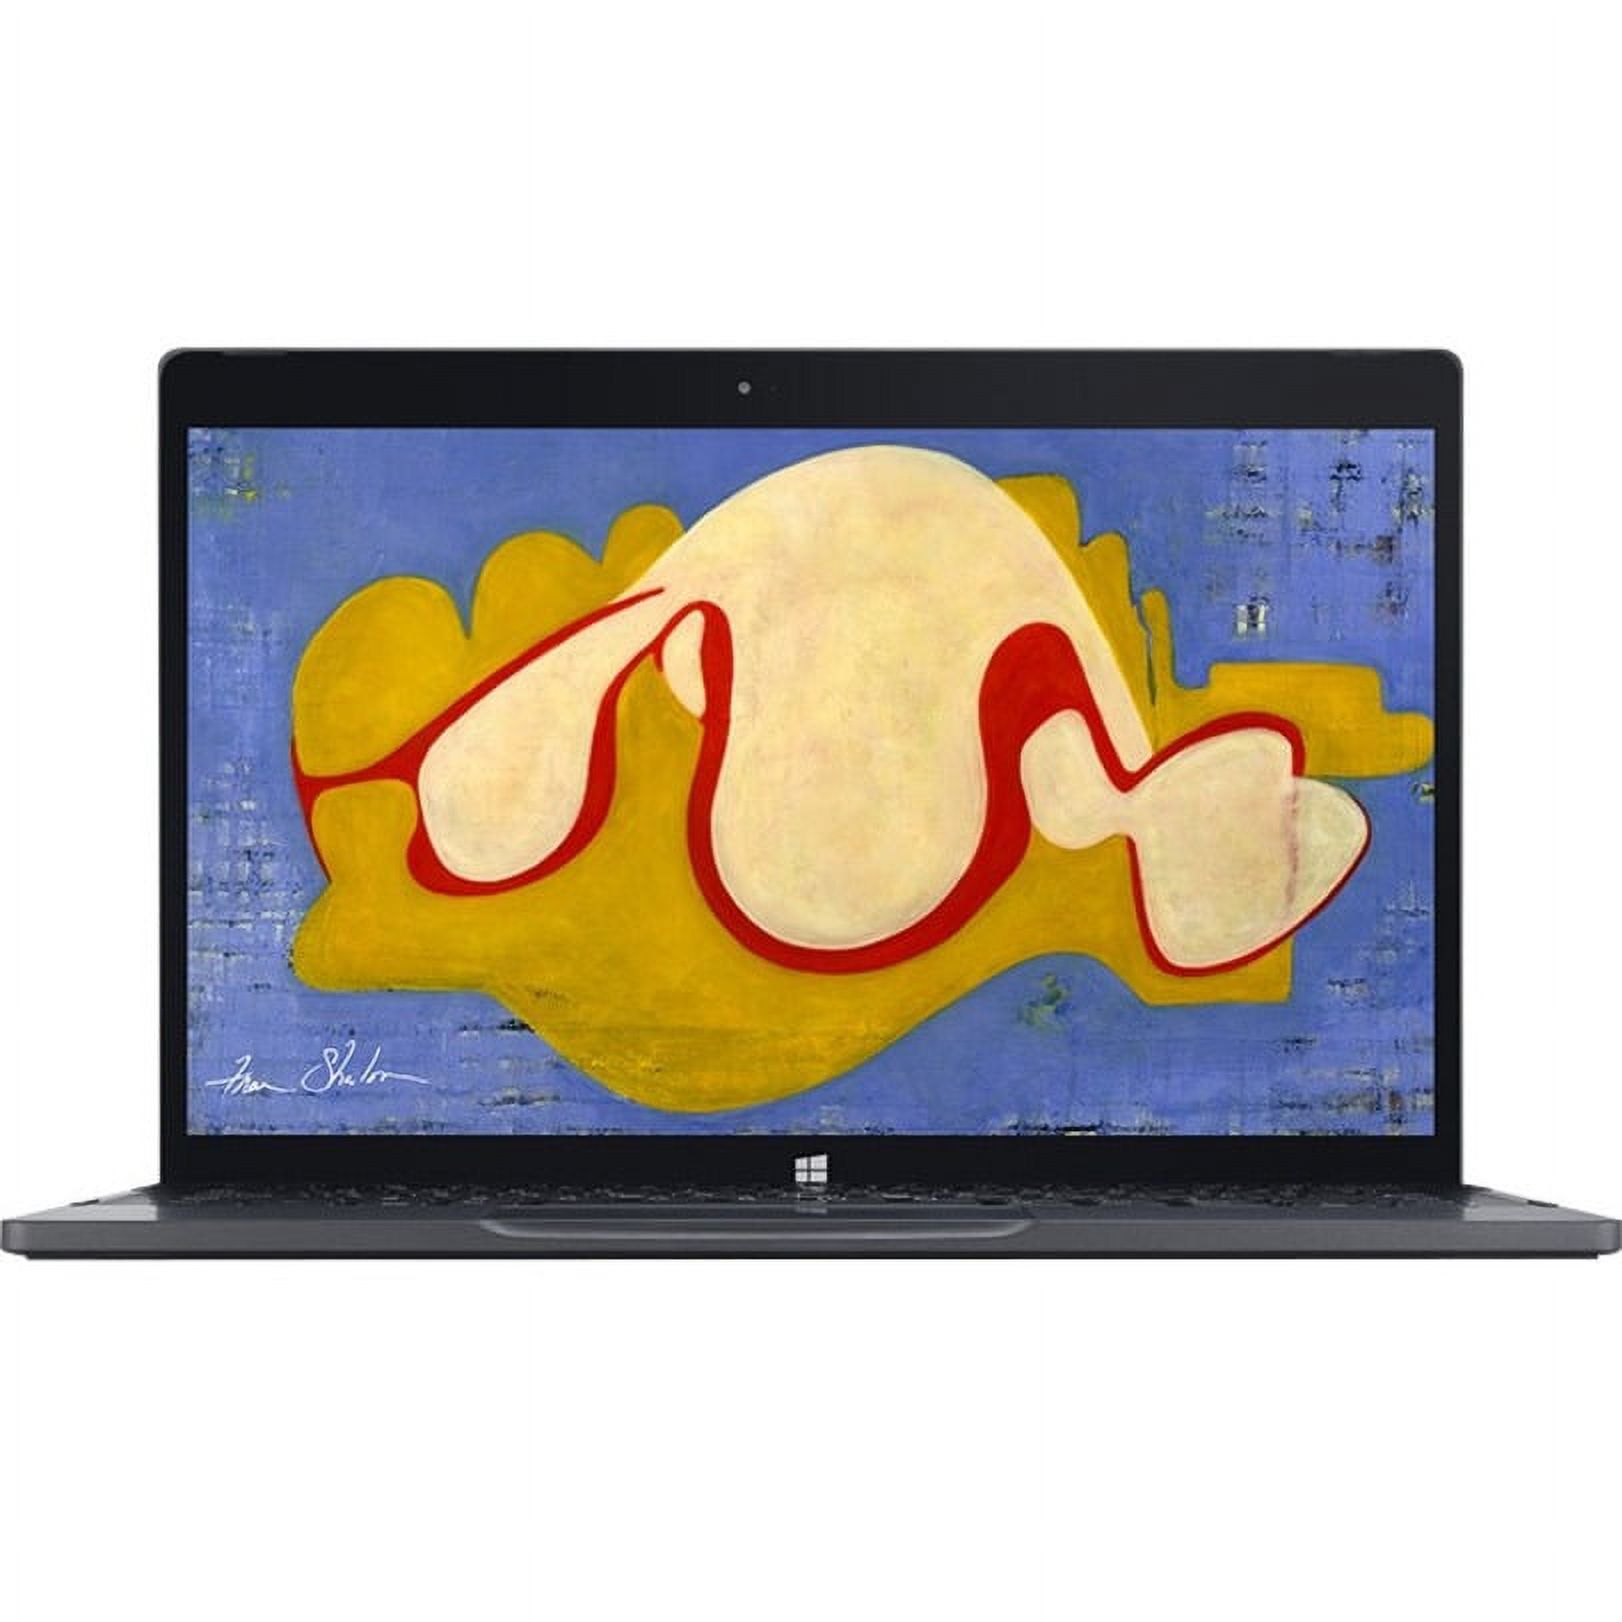 Dell XPS 12.5" 4K UHD Touchscreen 2-in-1 Laptop, Intel Core M m5-6Y54, 256GB SSD, Windows 10 Home, 12-9250 - image 4 of 7